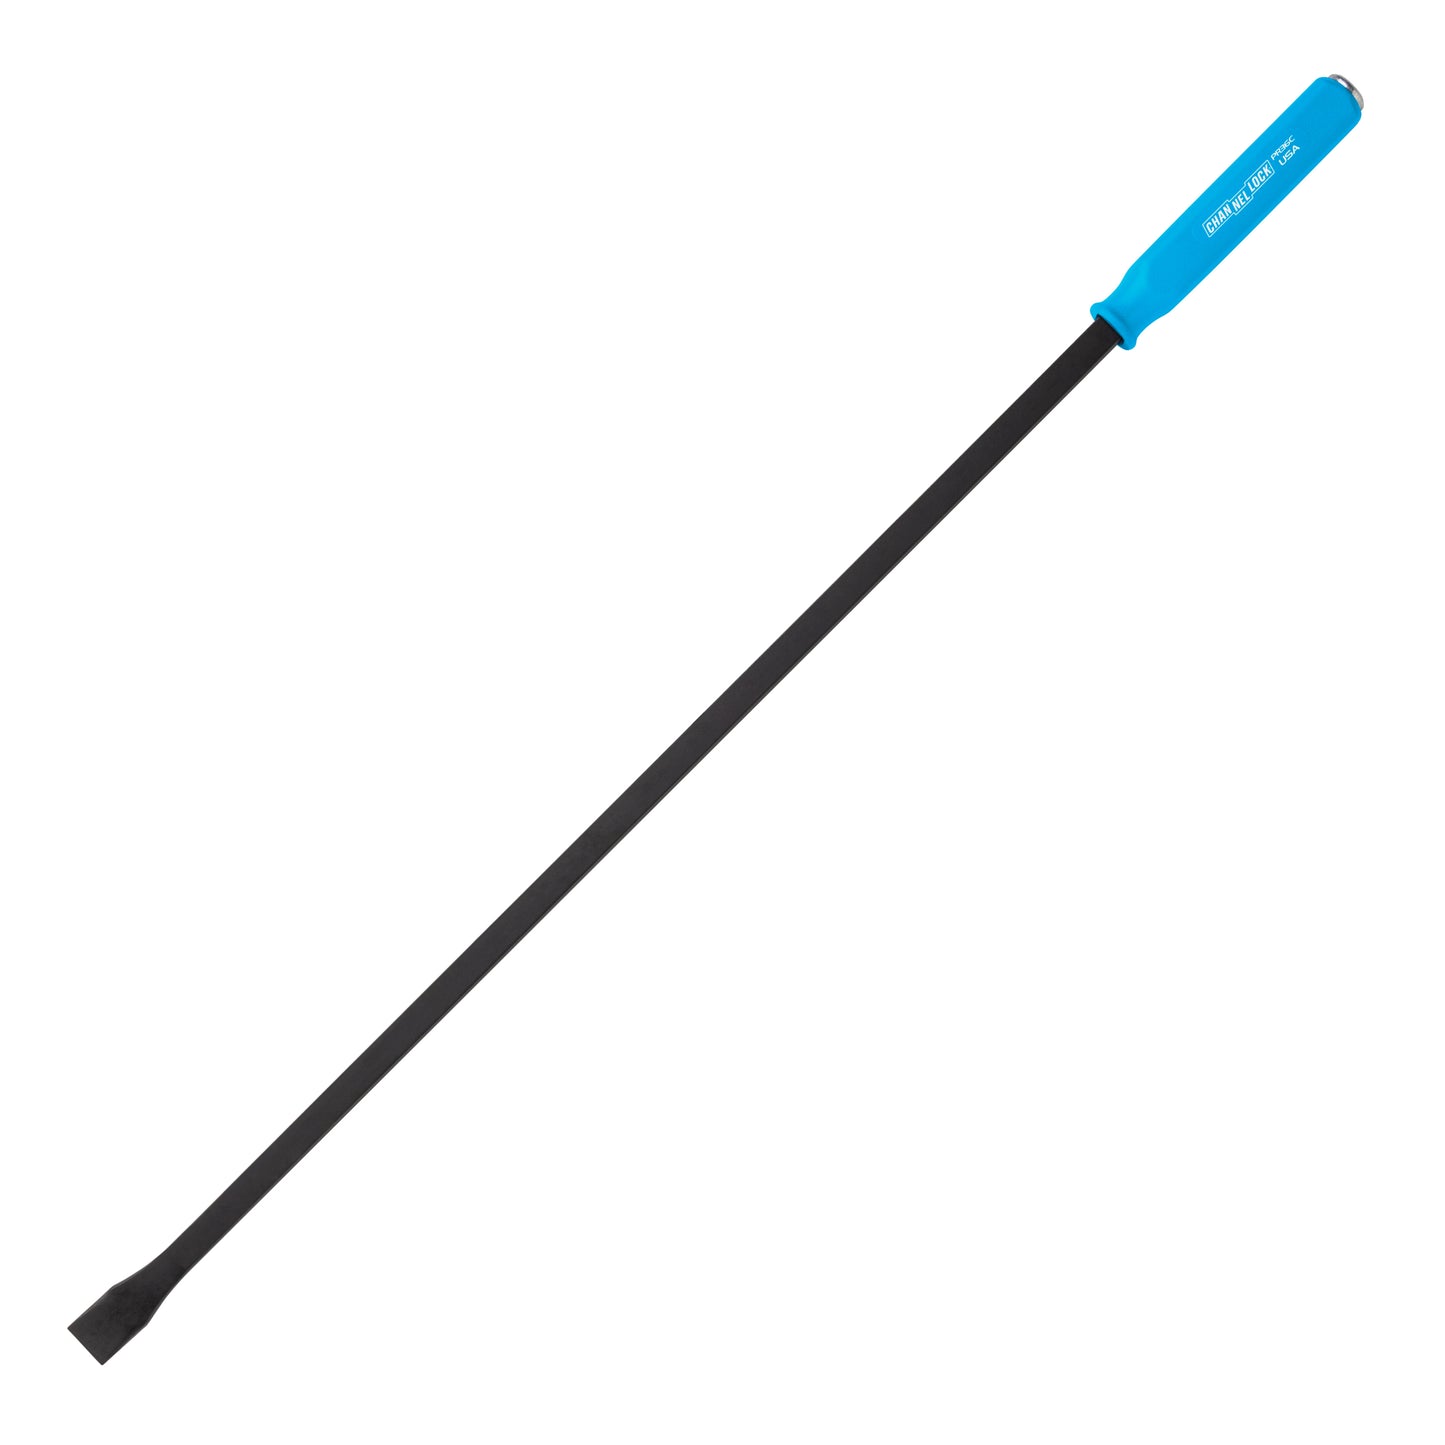 PR36C 1-1/4 x 28-inch Professional Pry Bar, 36-inch Overall Length